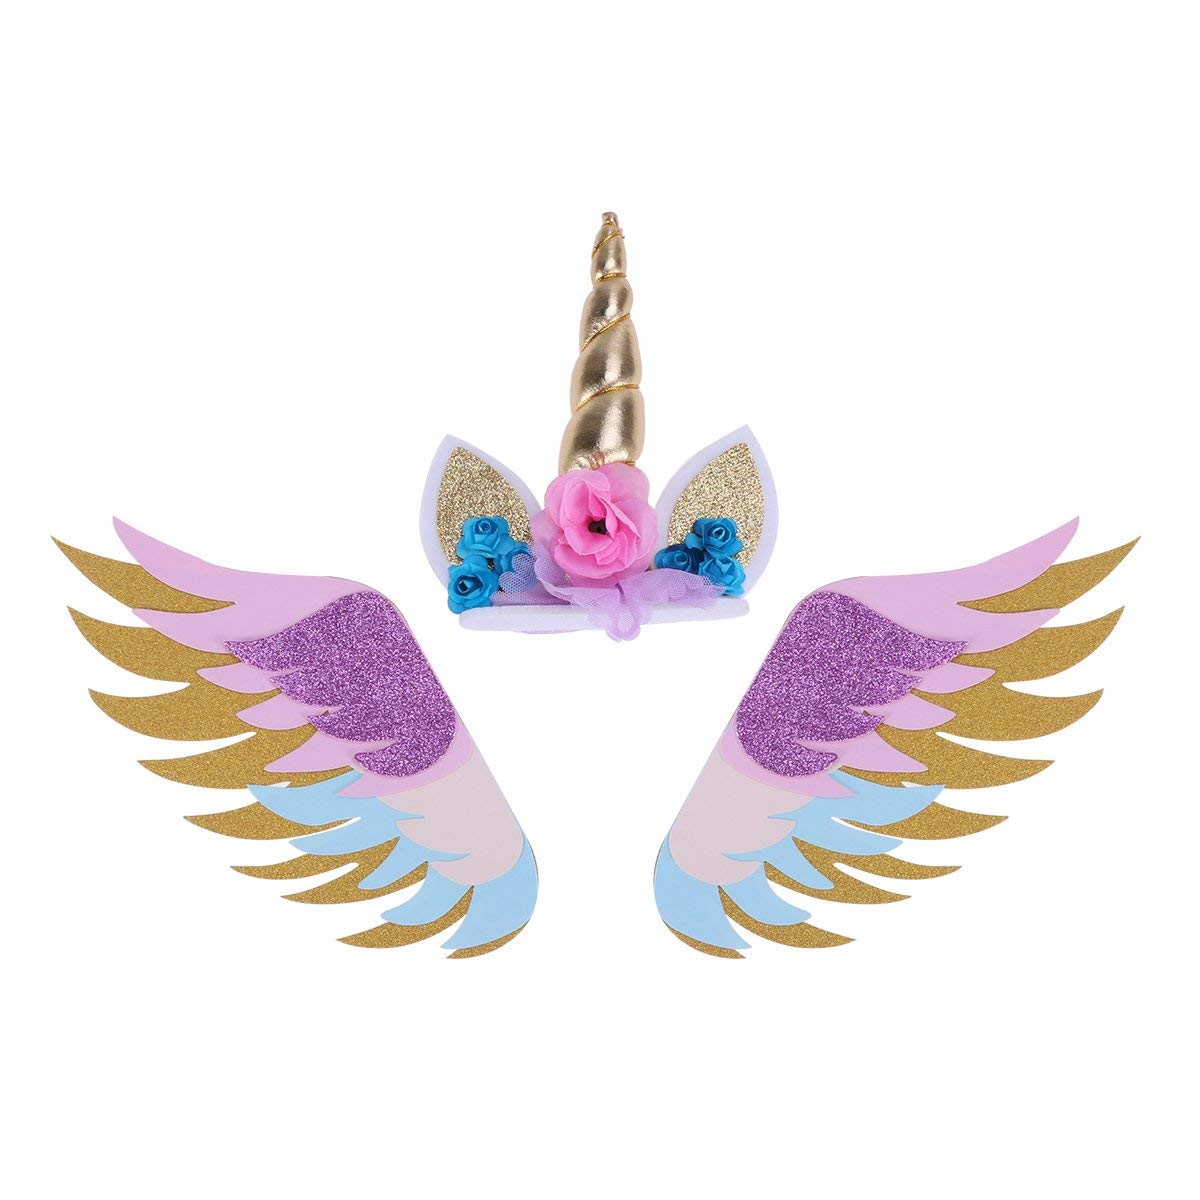 Unicorn Wings Cake Topper Glitter Paper Cake Insertion Card Cake Decoration Cupcake Toppers Birthday Baby Shower Wedding 3PCS - image 1 of 6